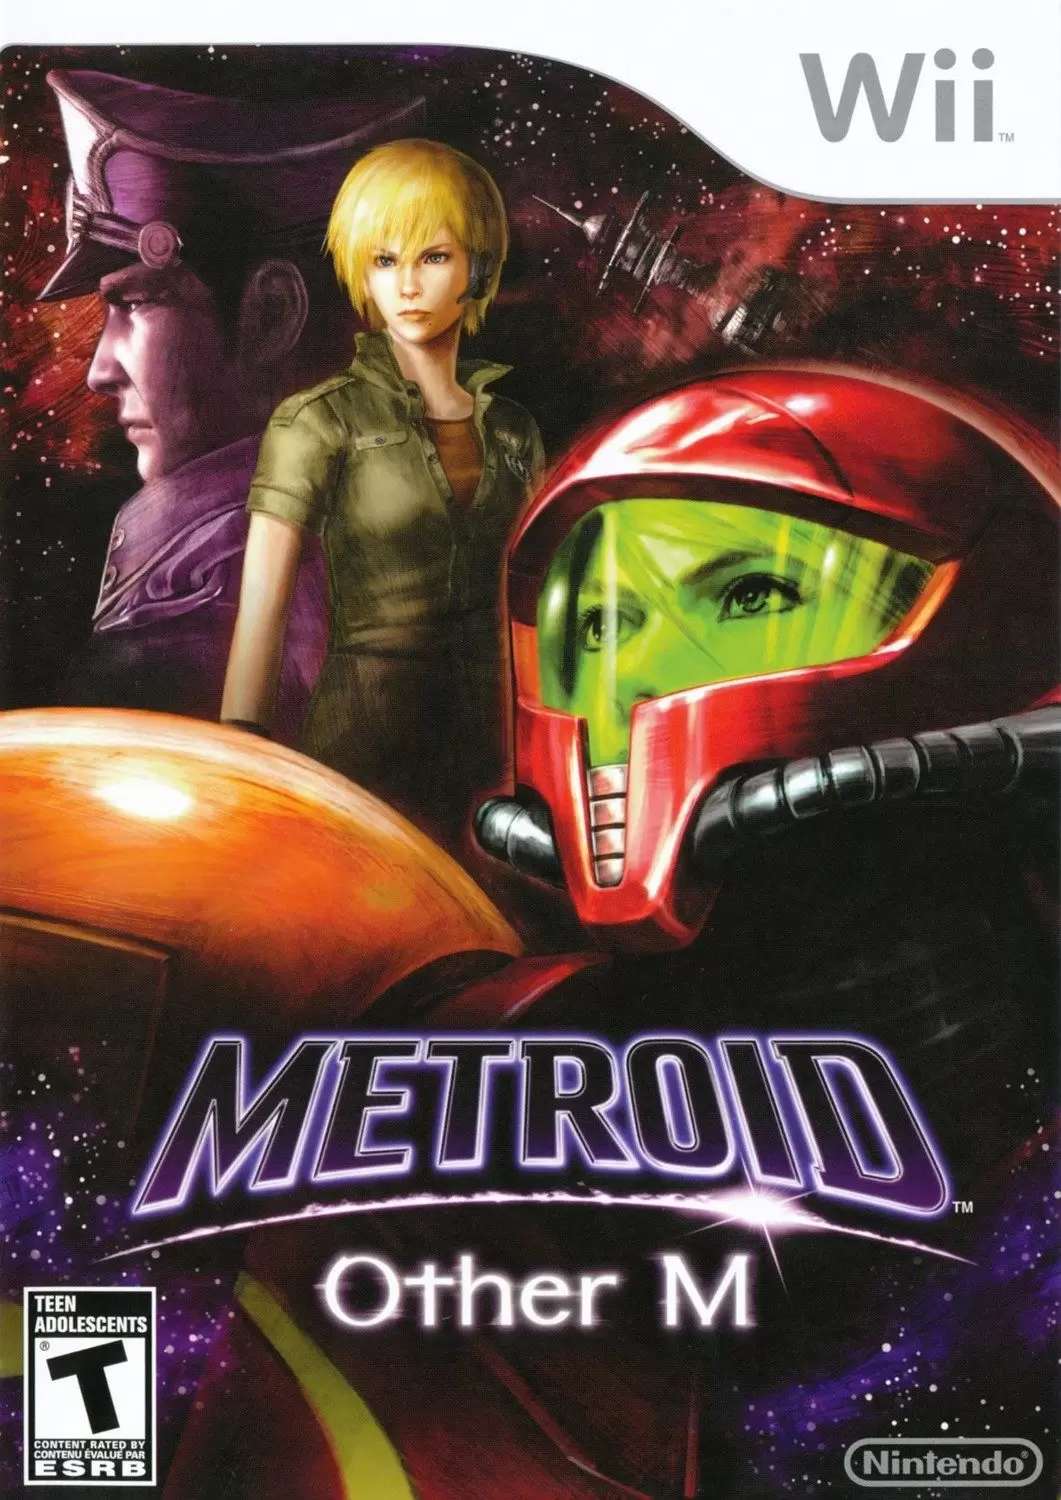 Nintendo Wii Games - Metroid: Other M